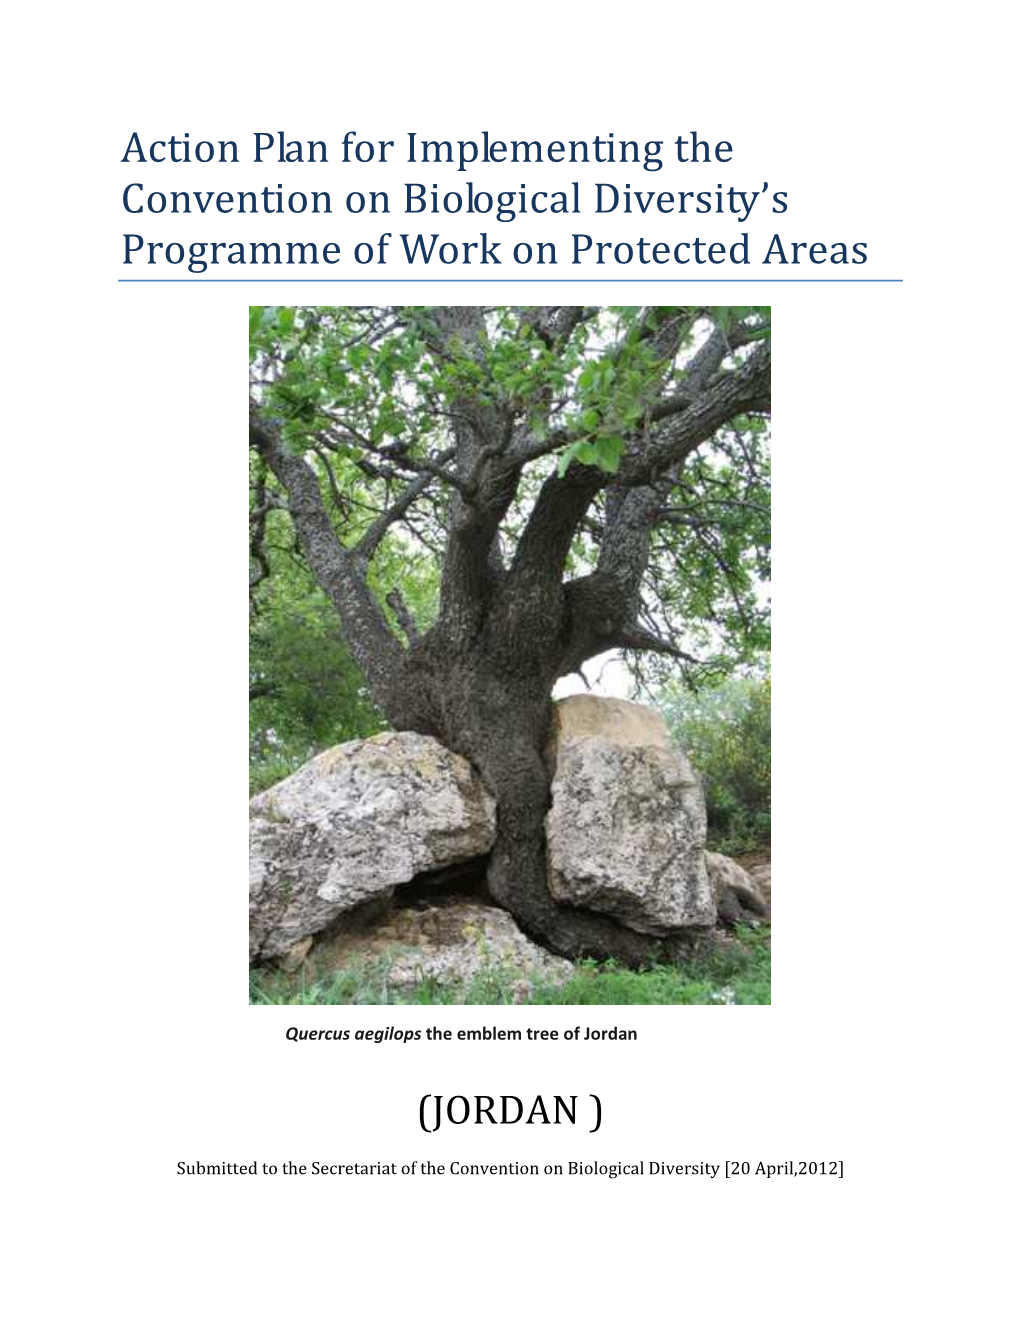 Action Plan for Implementing the Convention on Biological Diversity's